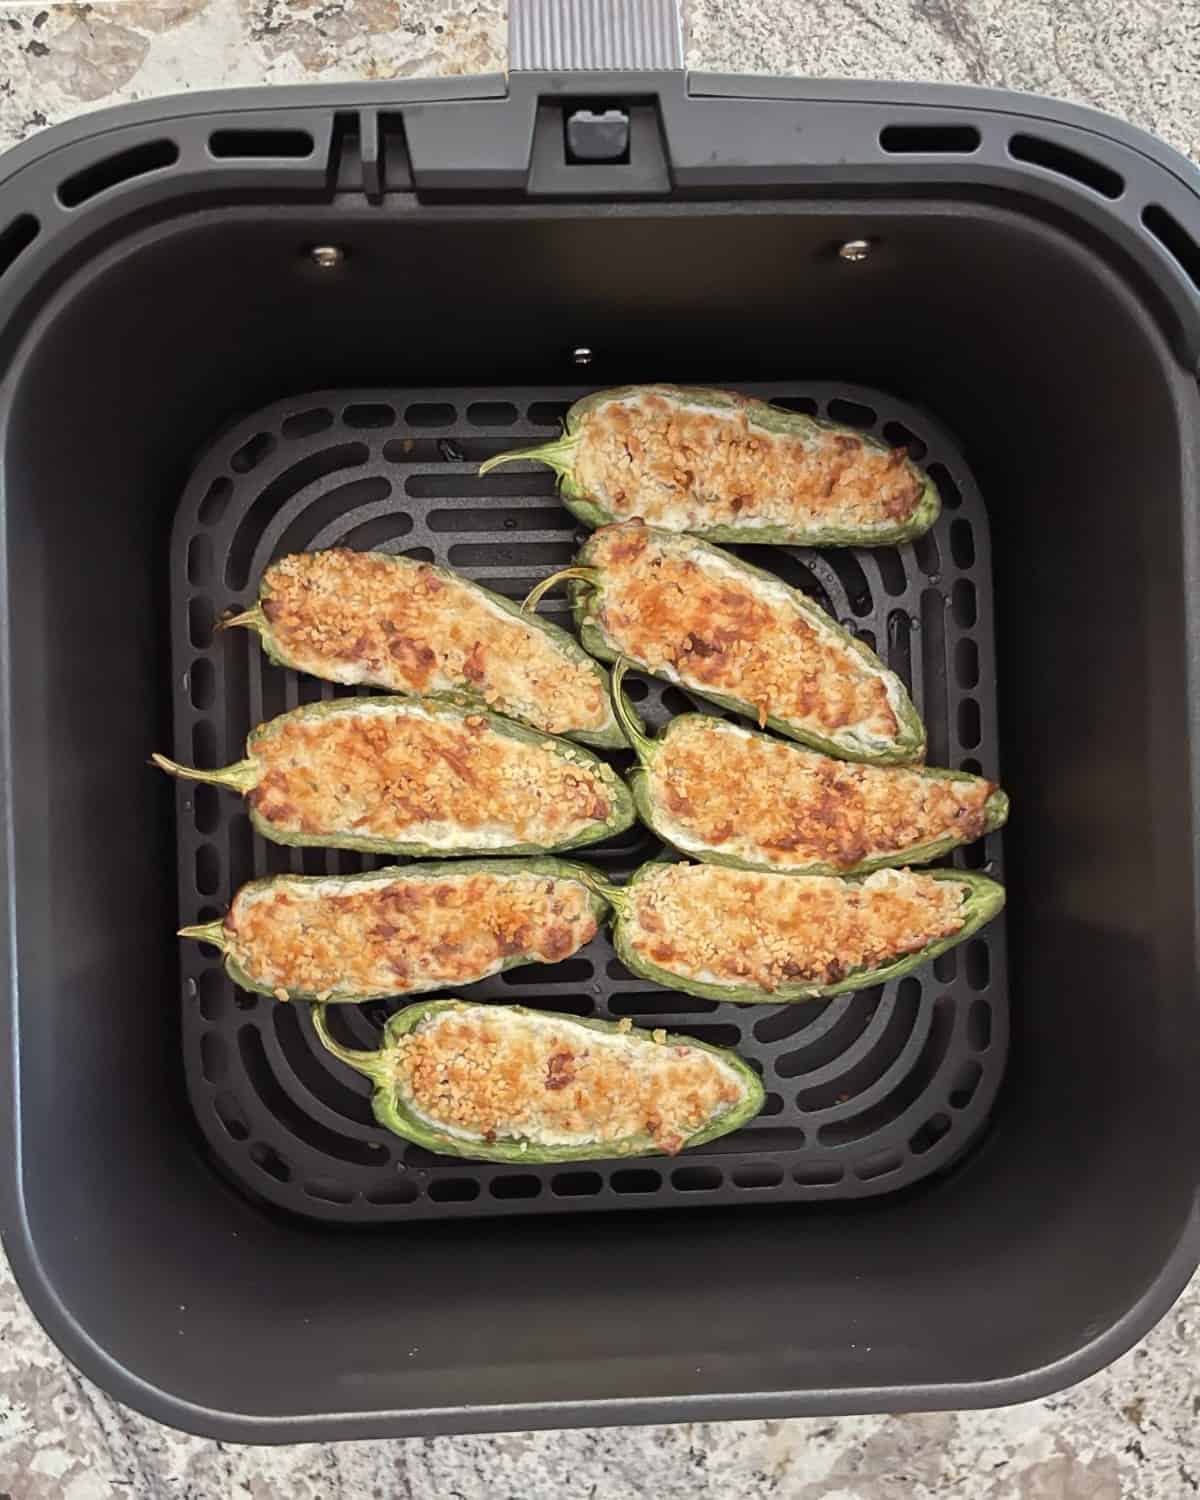 Fresh cooked jalapeno poppers in air fryer basket.